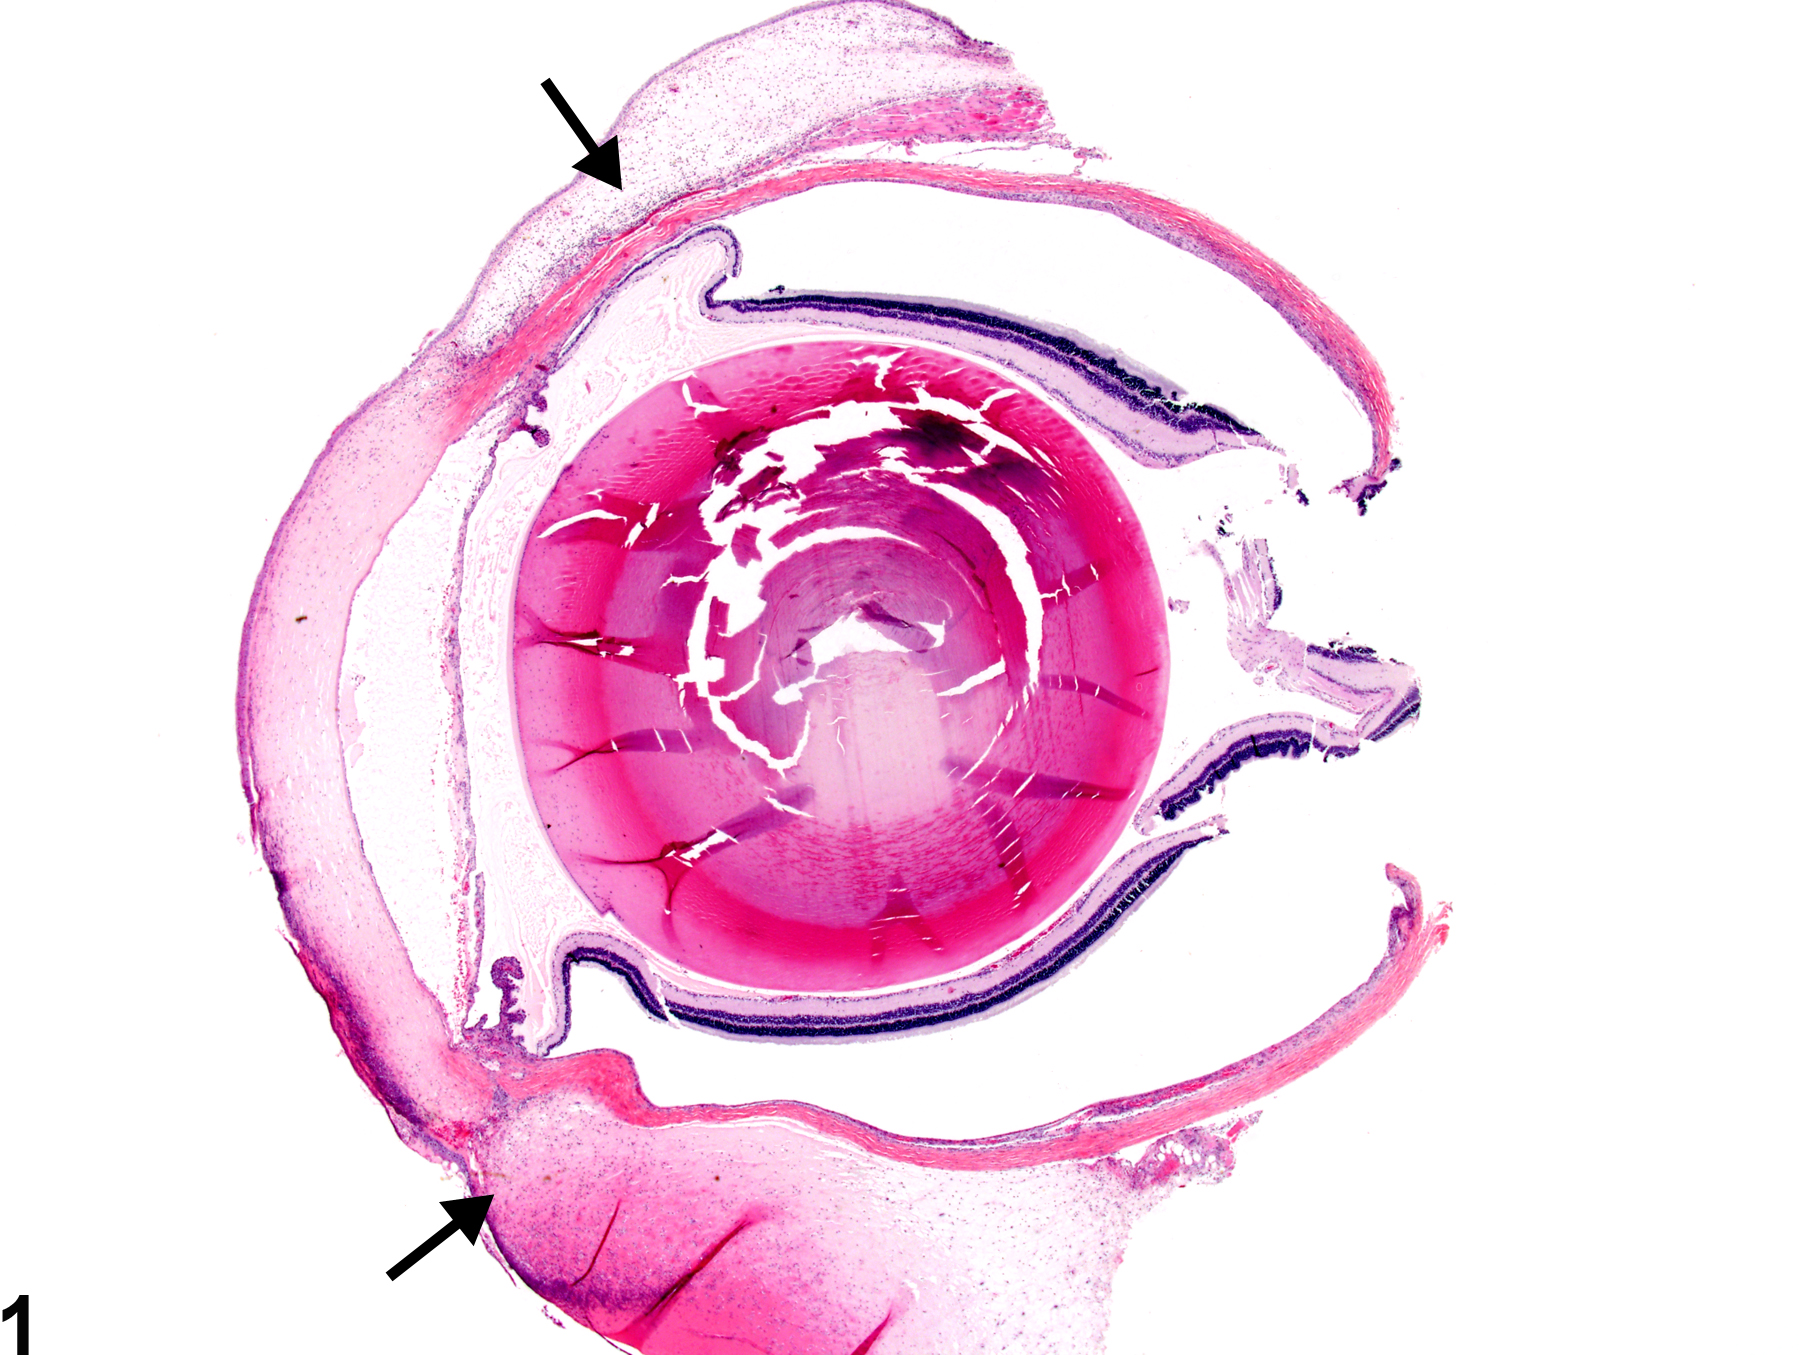 Image of conjunctiva edema in the eye from a female F344/N rat in a chronic study